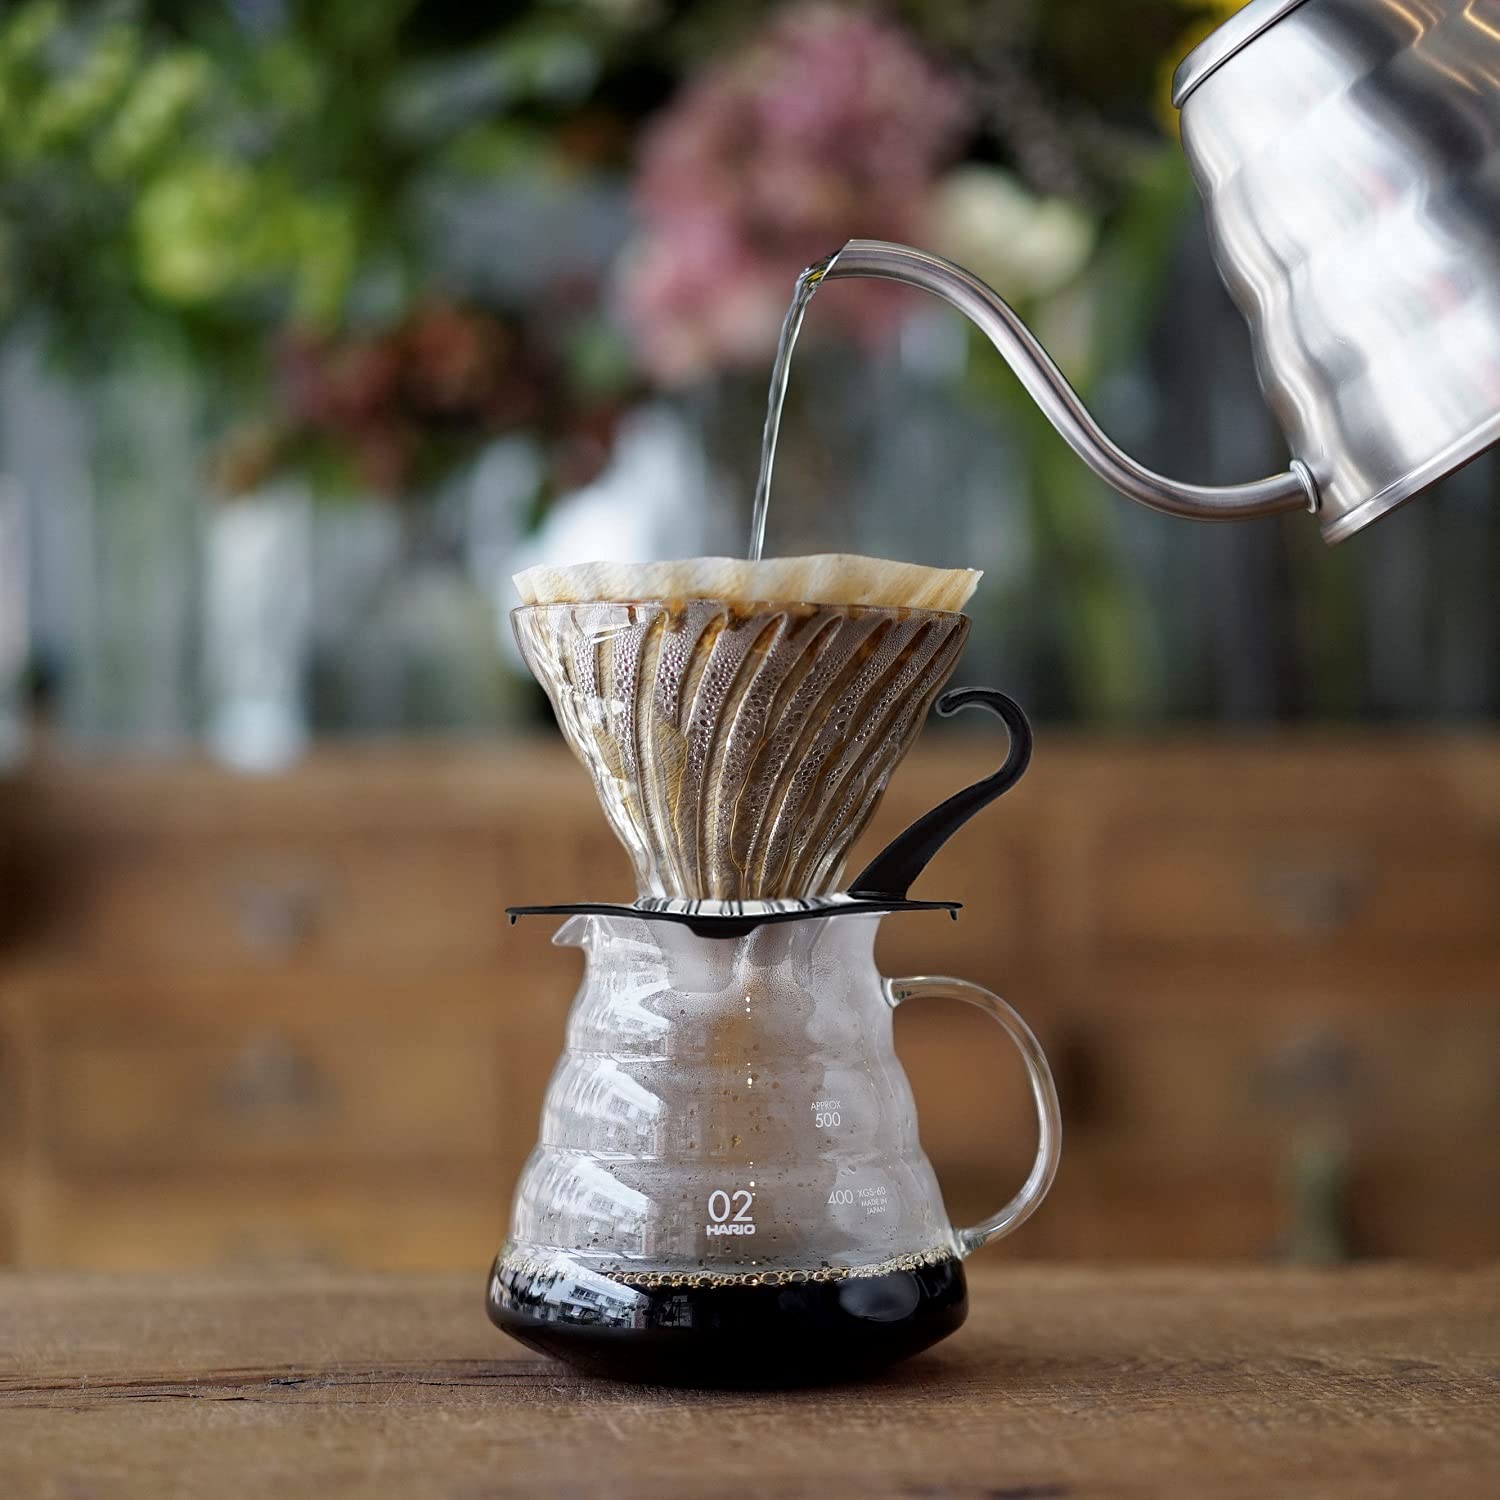 THE ART AND SCIENCE OF COFFEE BREWING